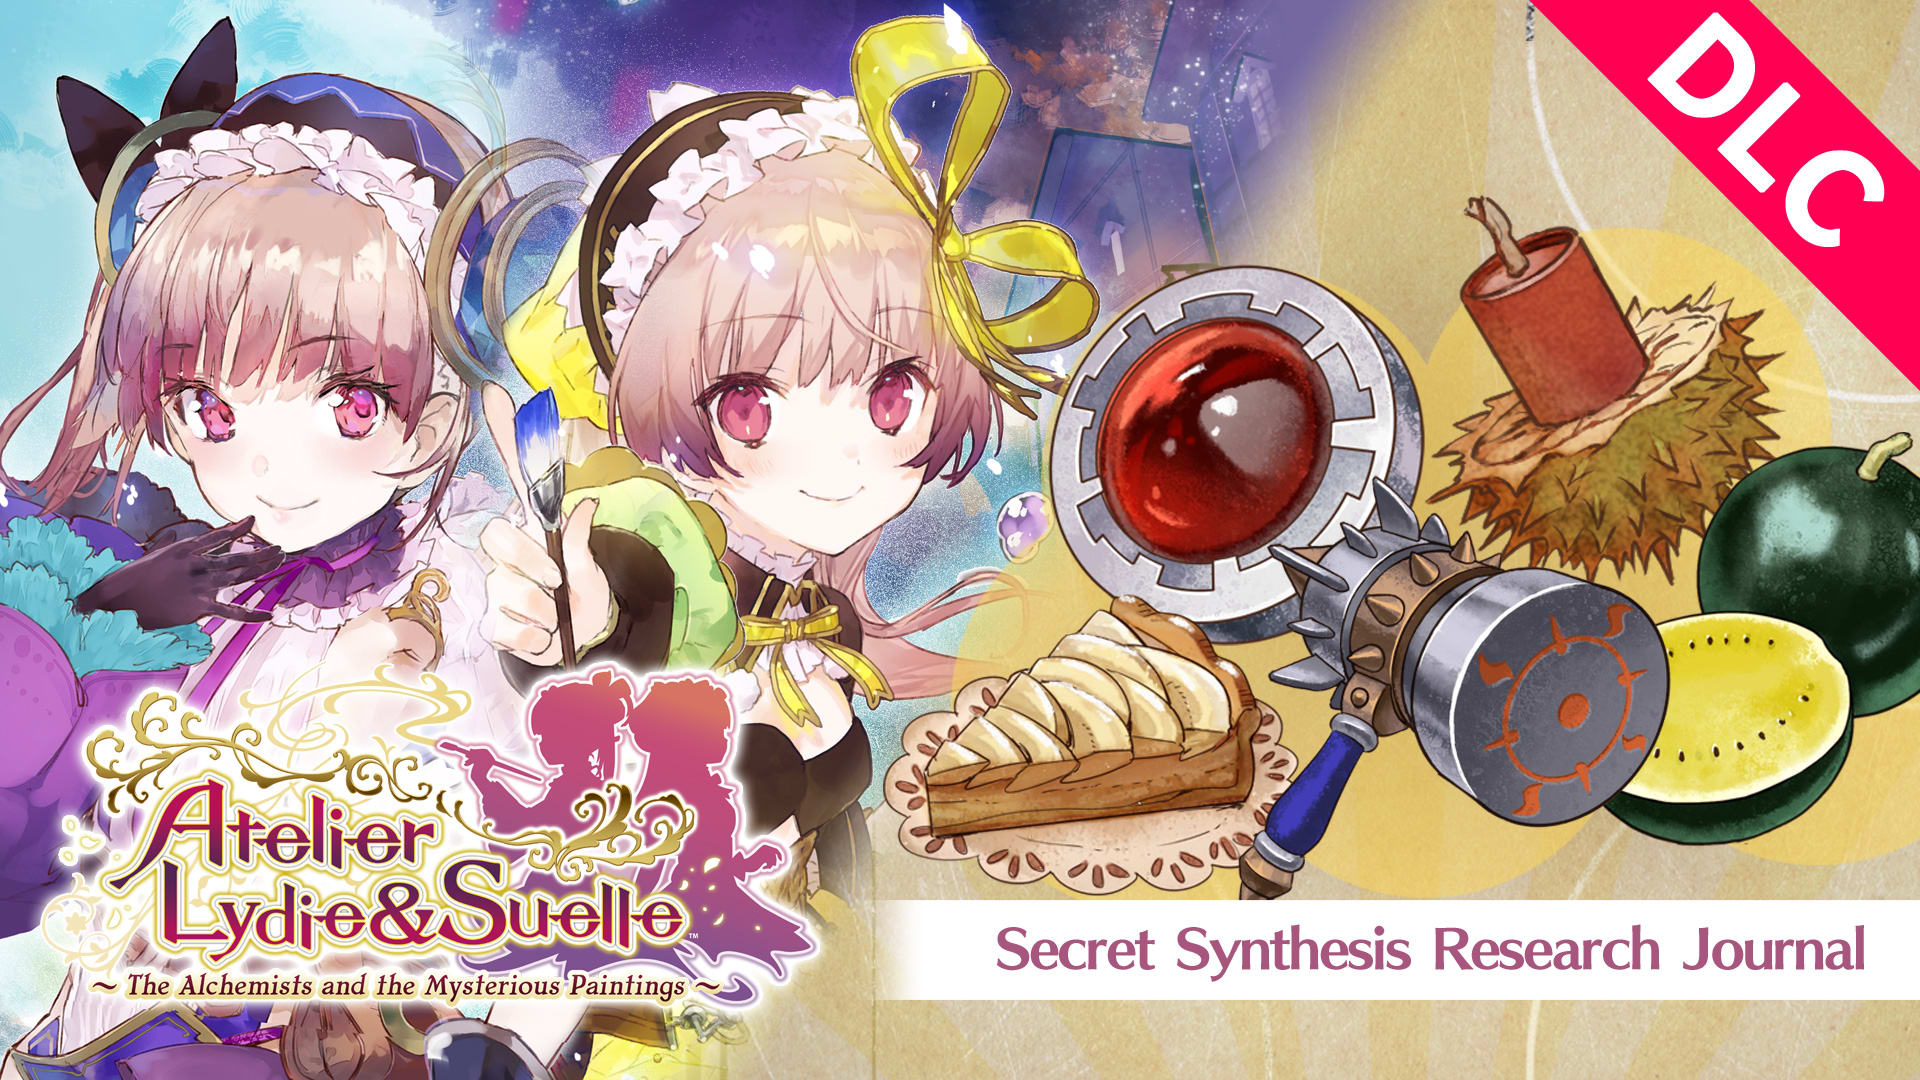 Secret Synthesis Research Journal